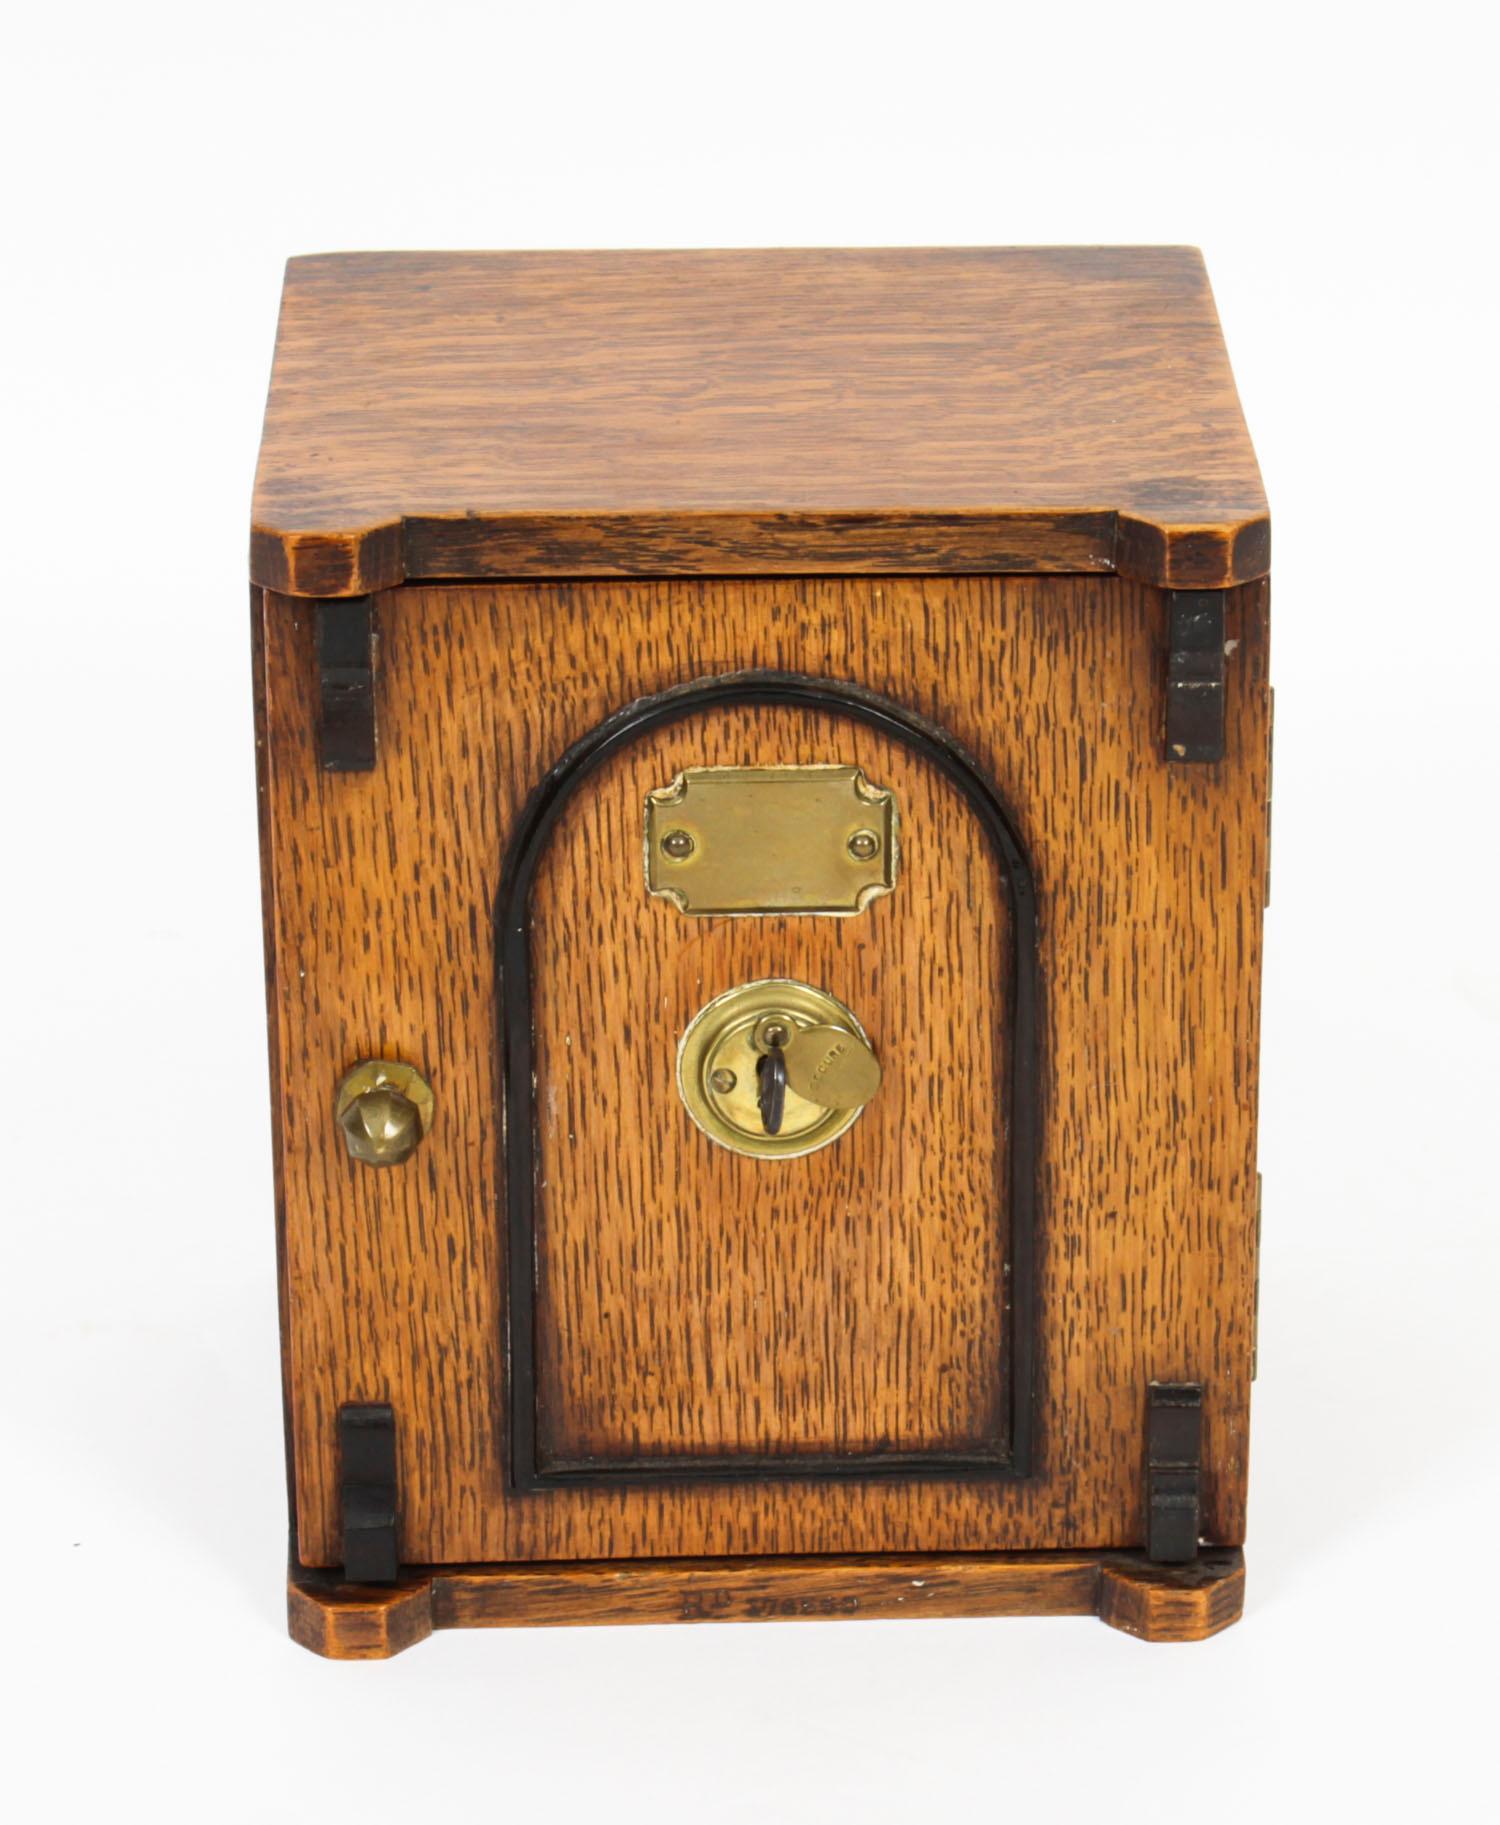 This is a stylish antique Victorian oak novelty table top cigar box, circa 1870 un date.

The rectangular box is in a form of a safe, it features a panelled door with brass handle and central lock, opening to reveal two drawers with gothic revival